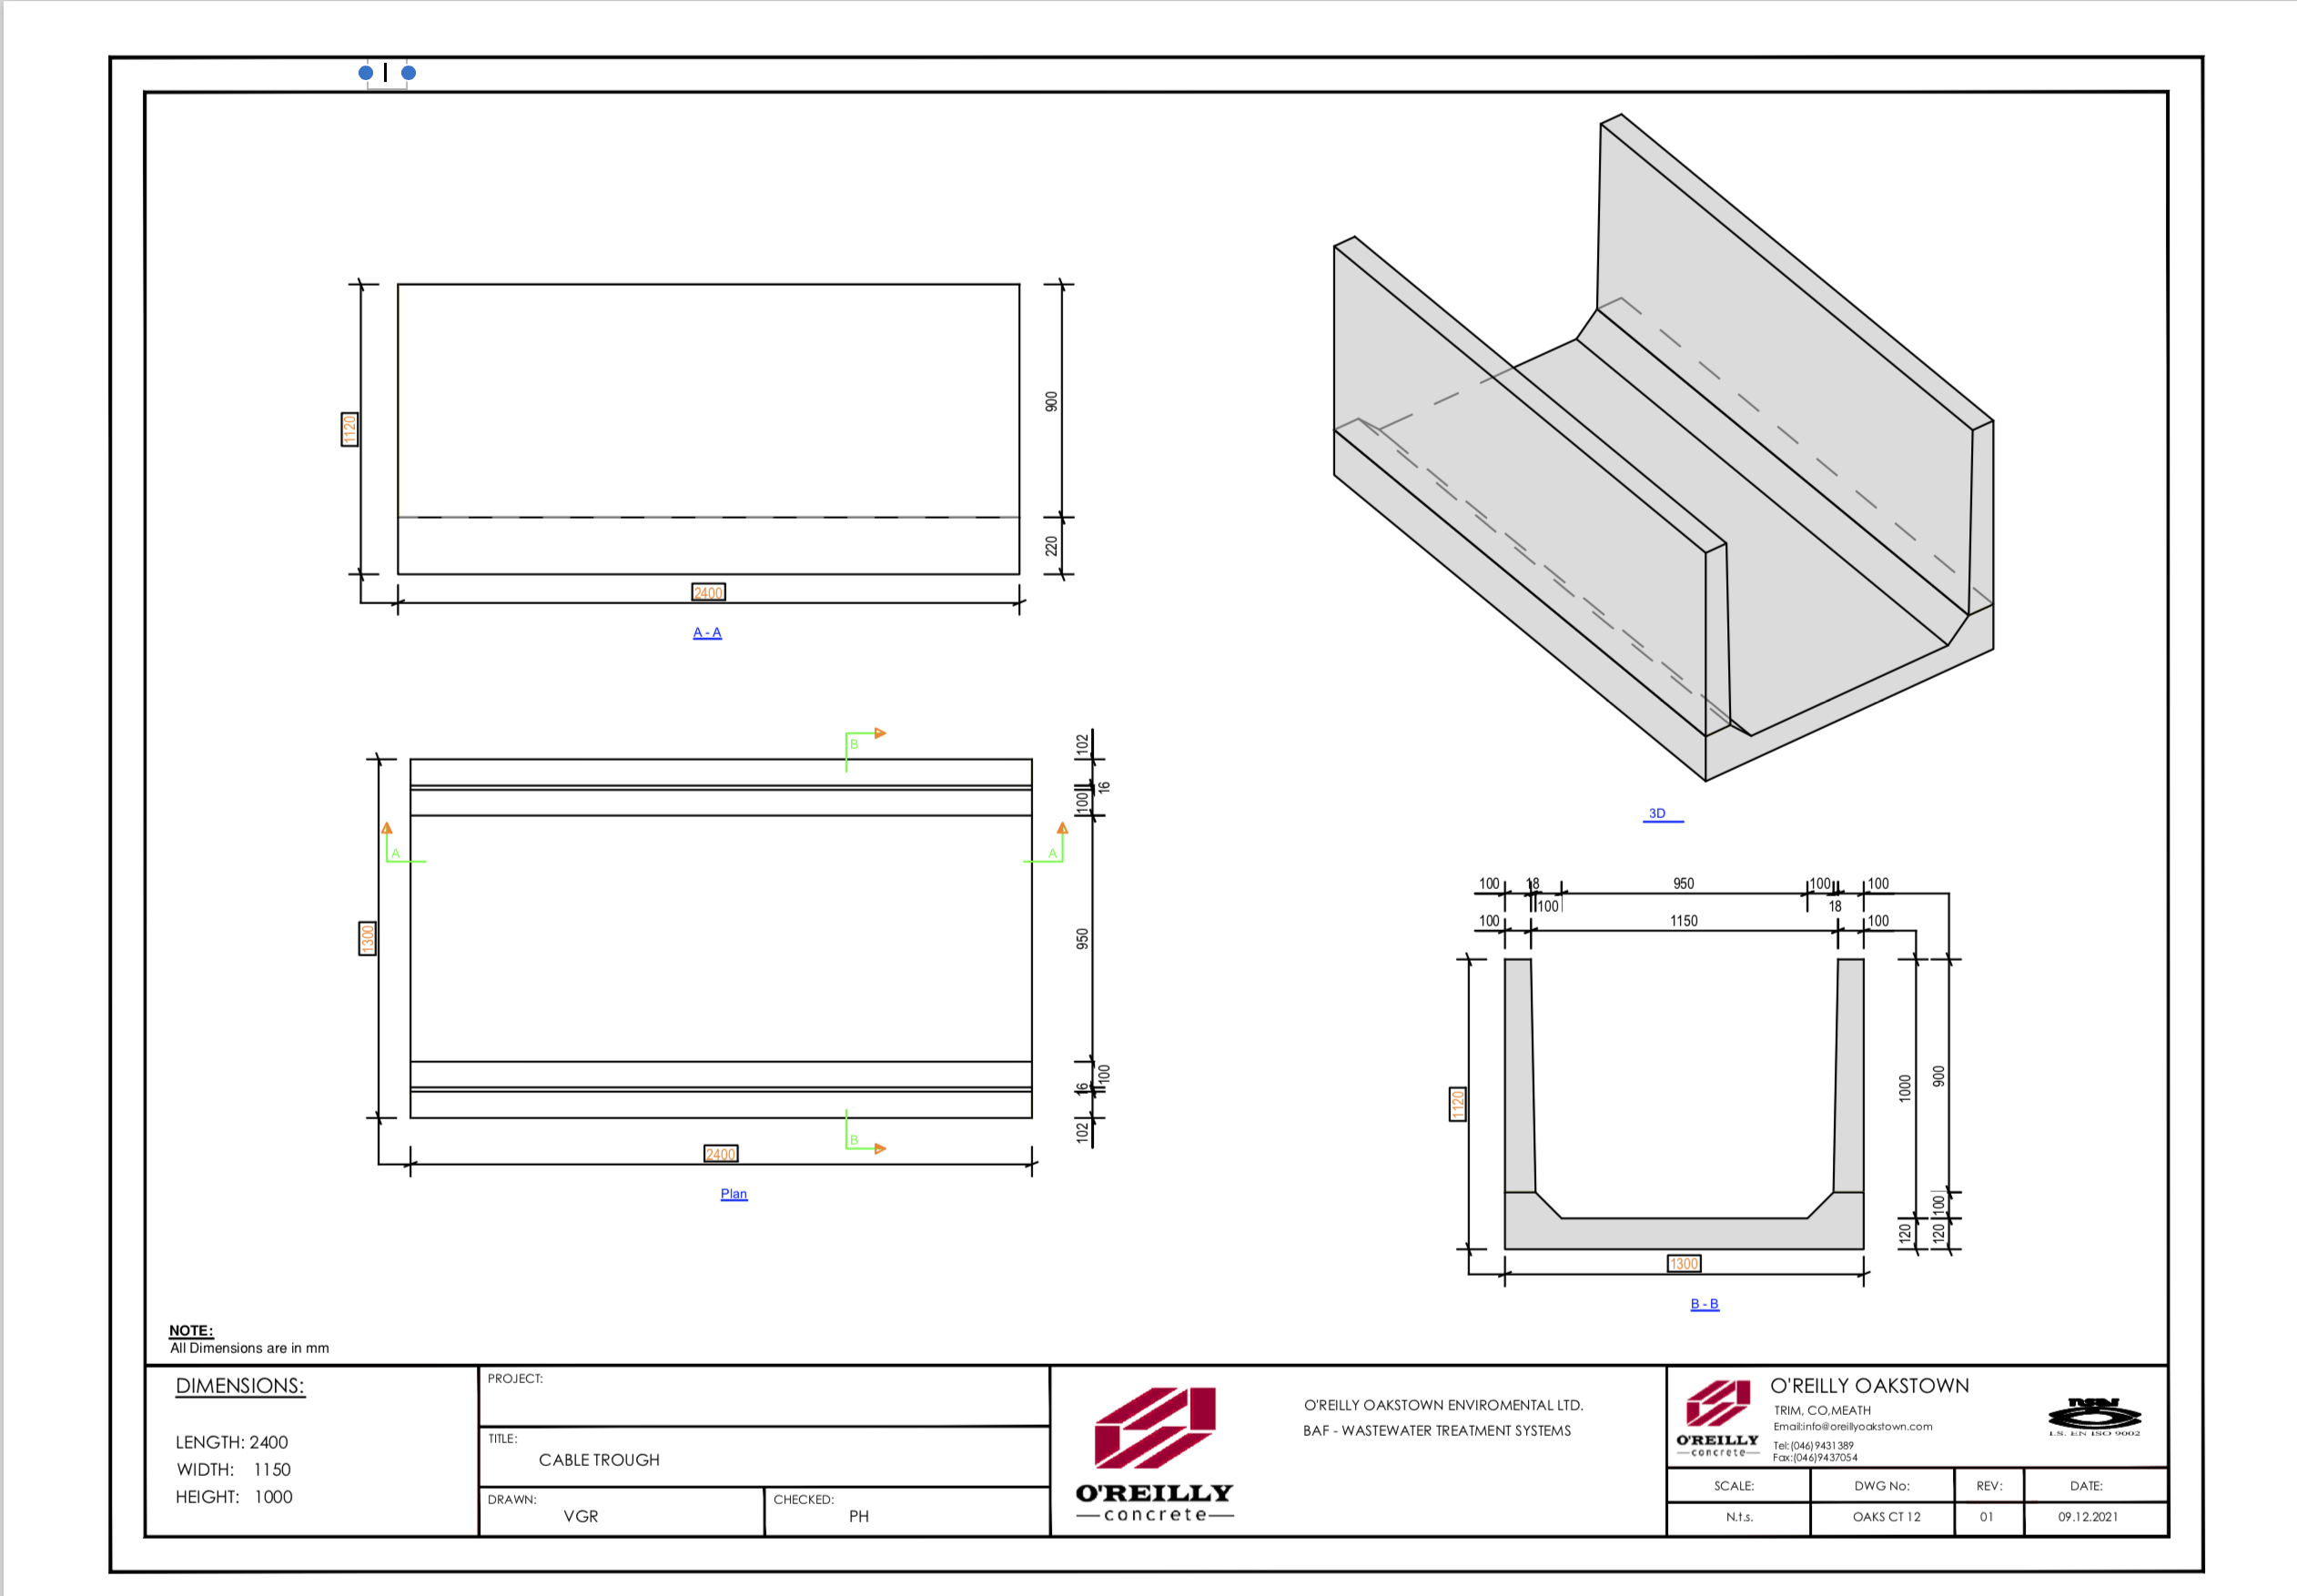 Cable Troughs - 2.4x1.15x1